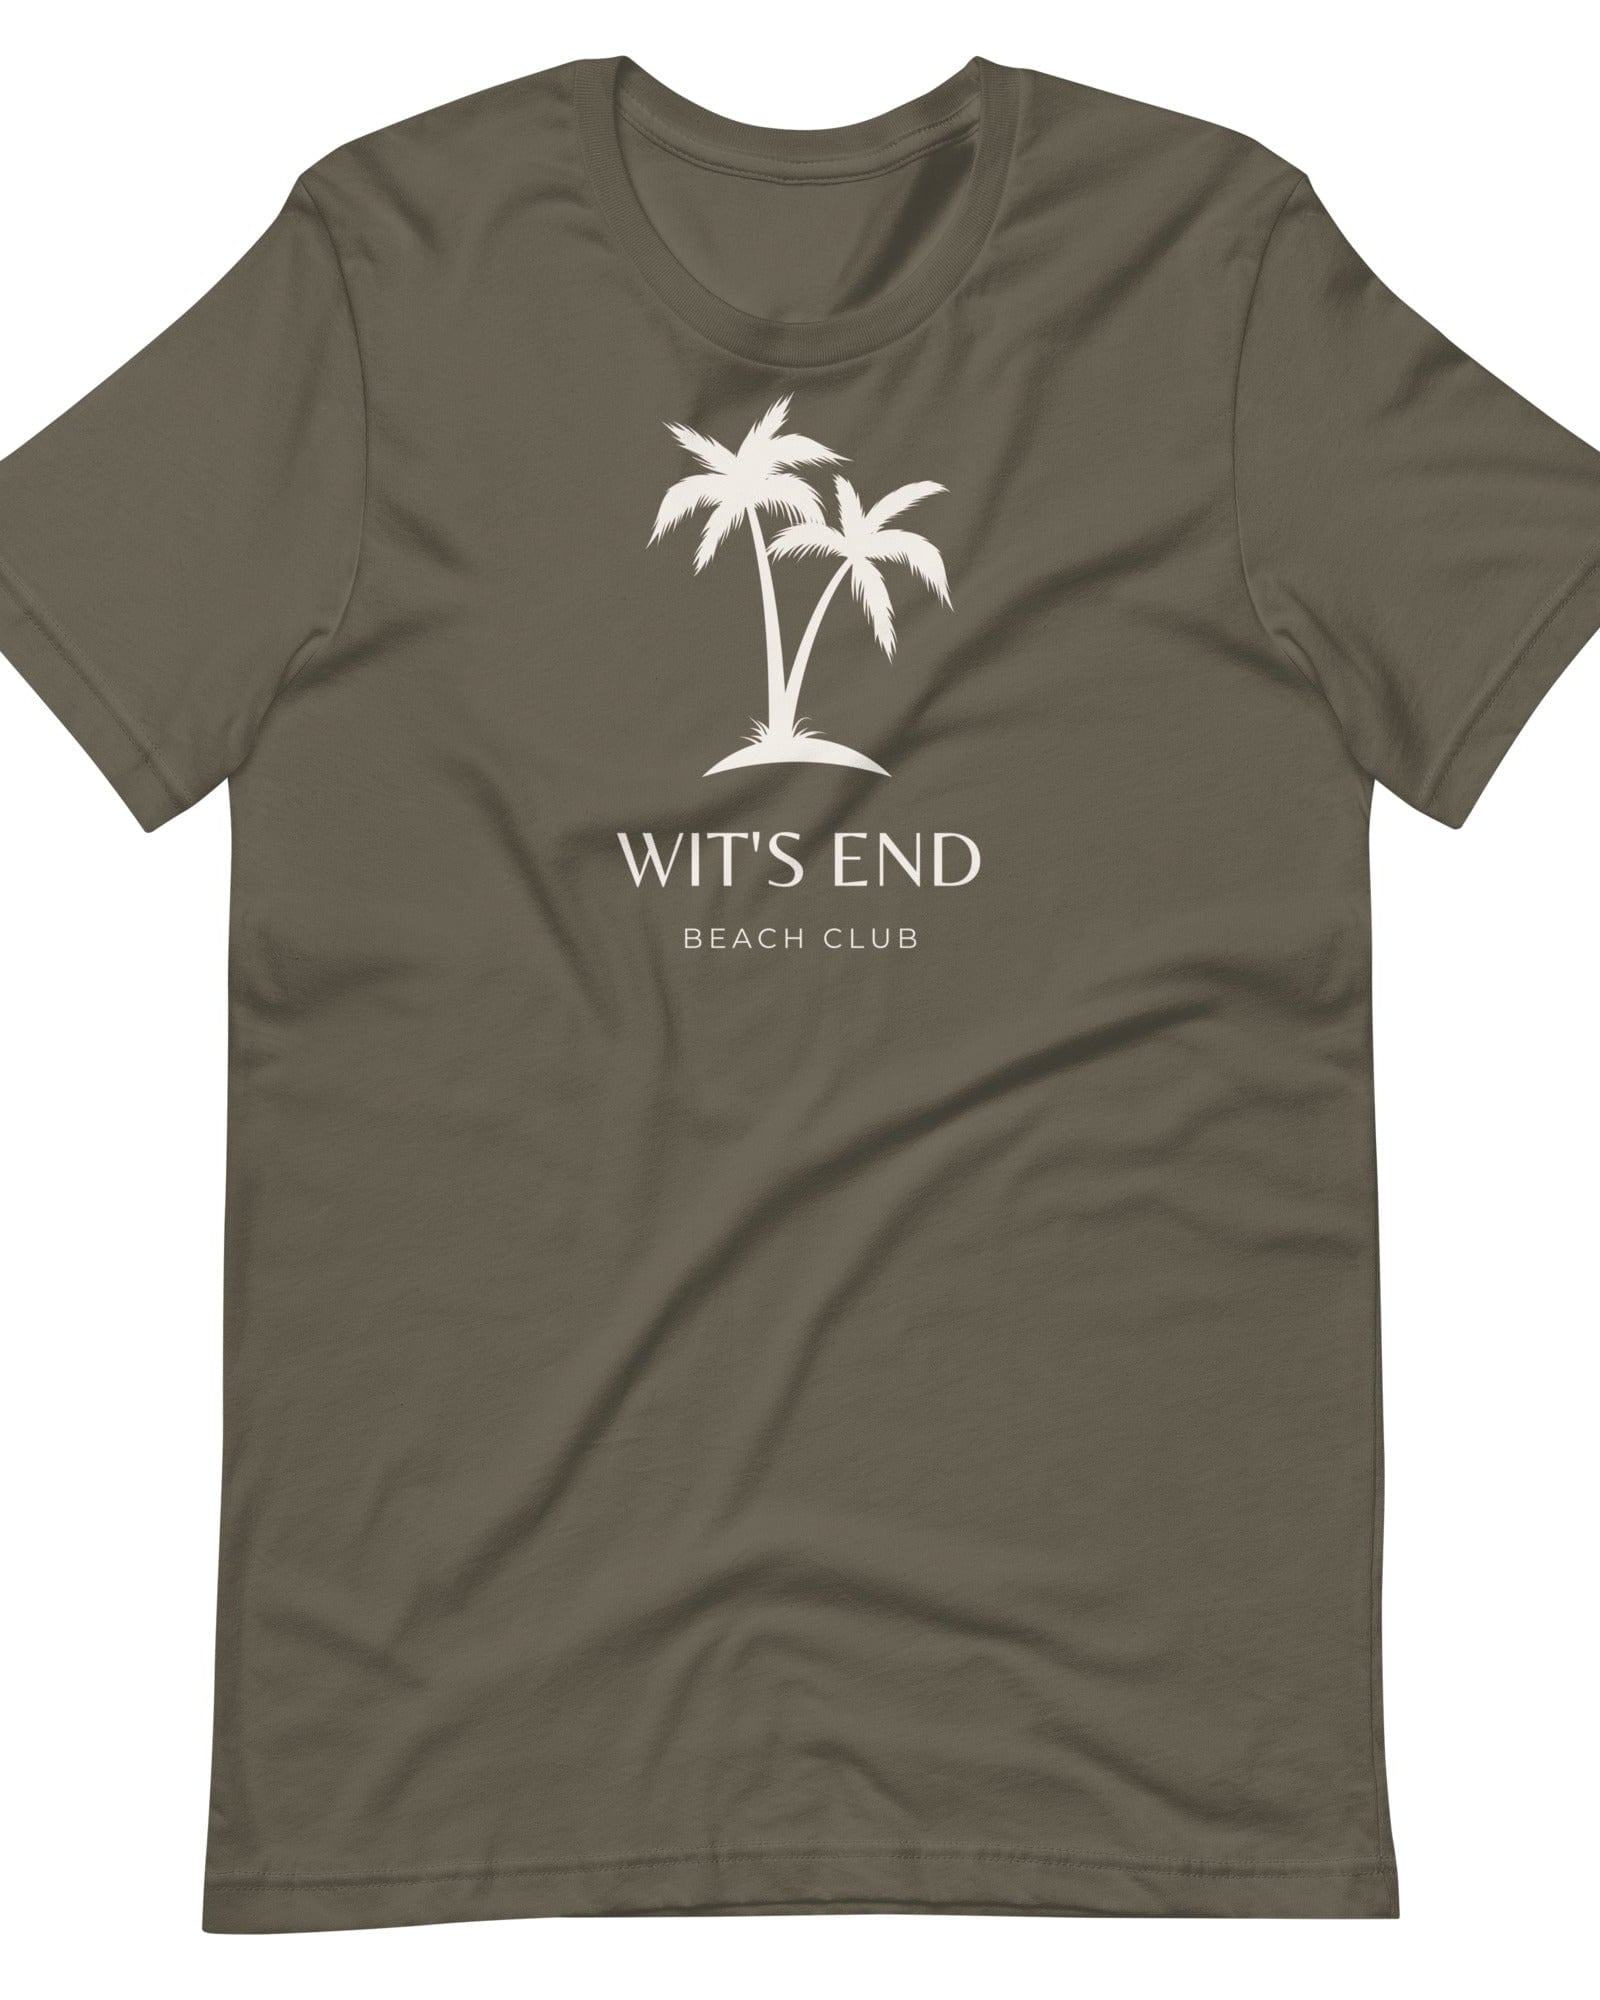 Wit's End Beach Club T-shirt Army / S Shirts & Tops Jolly & Goode